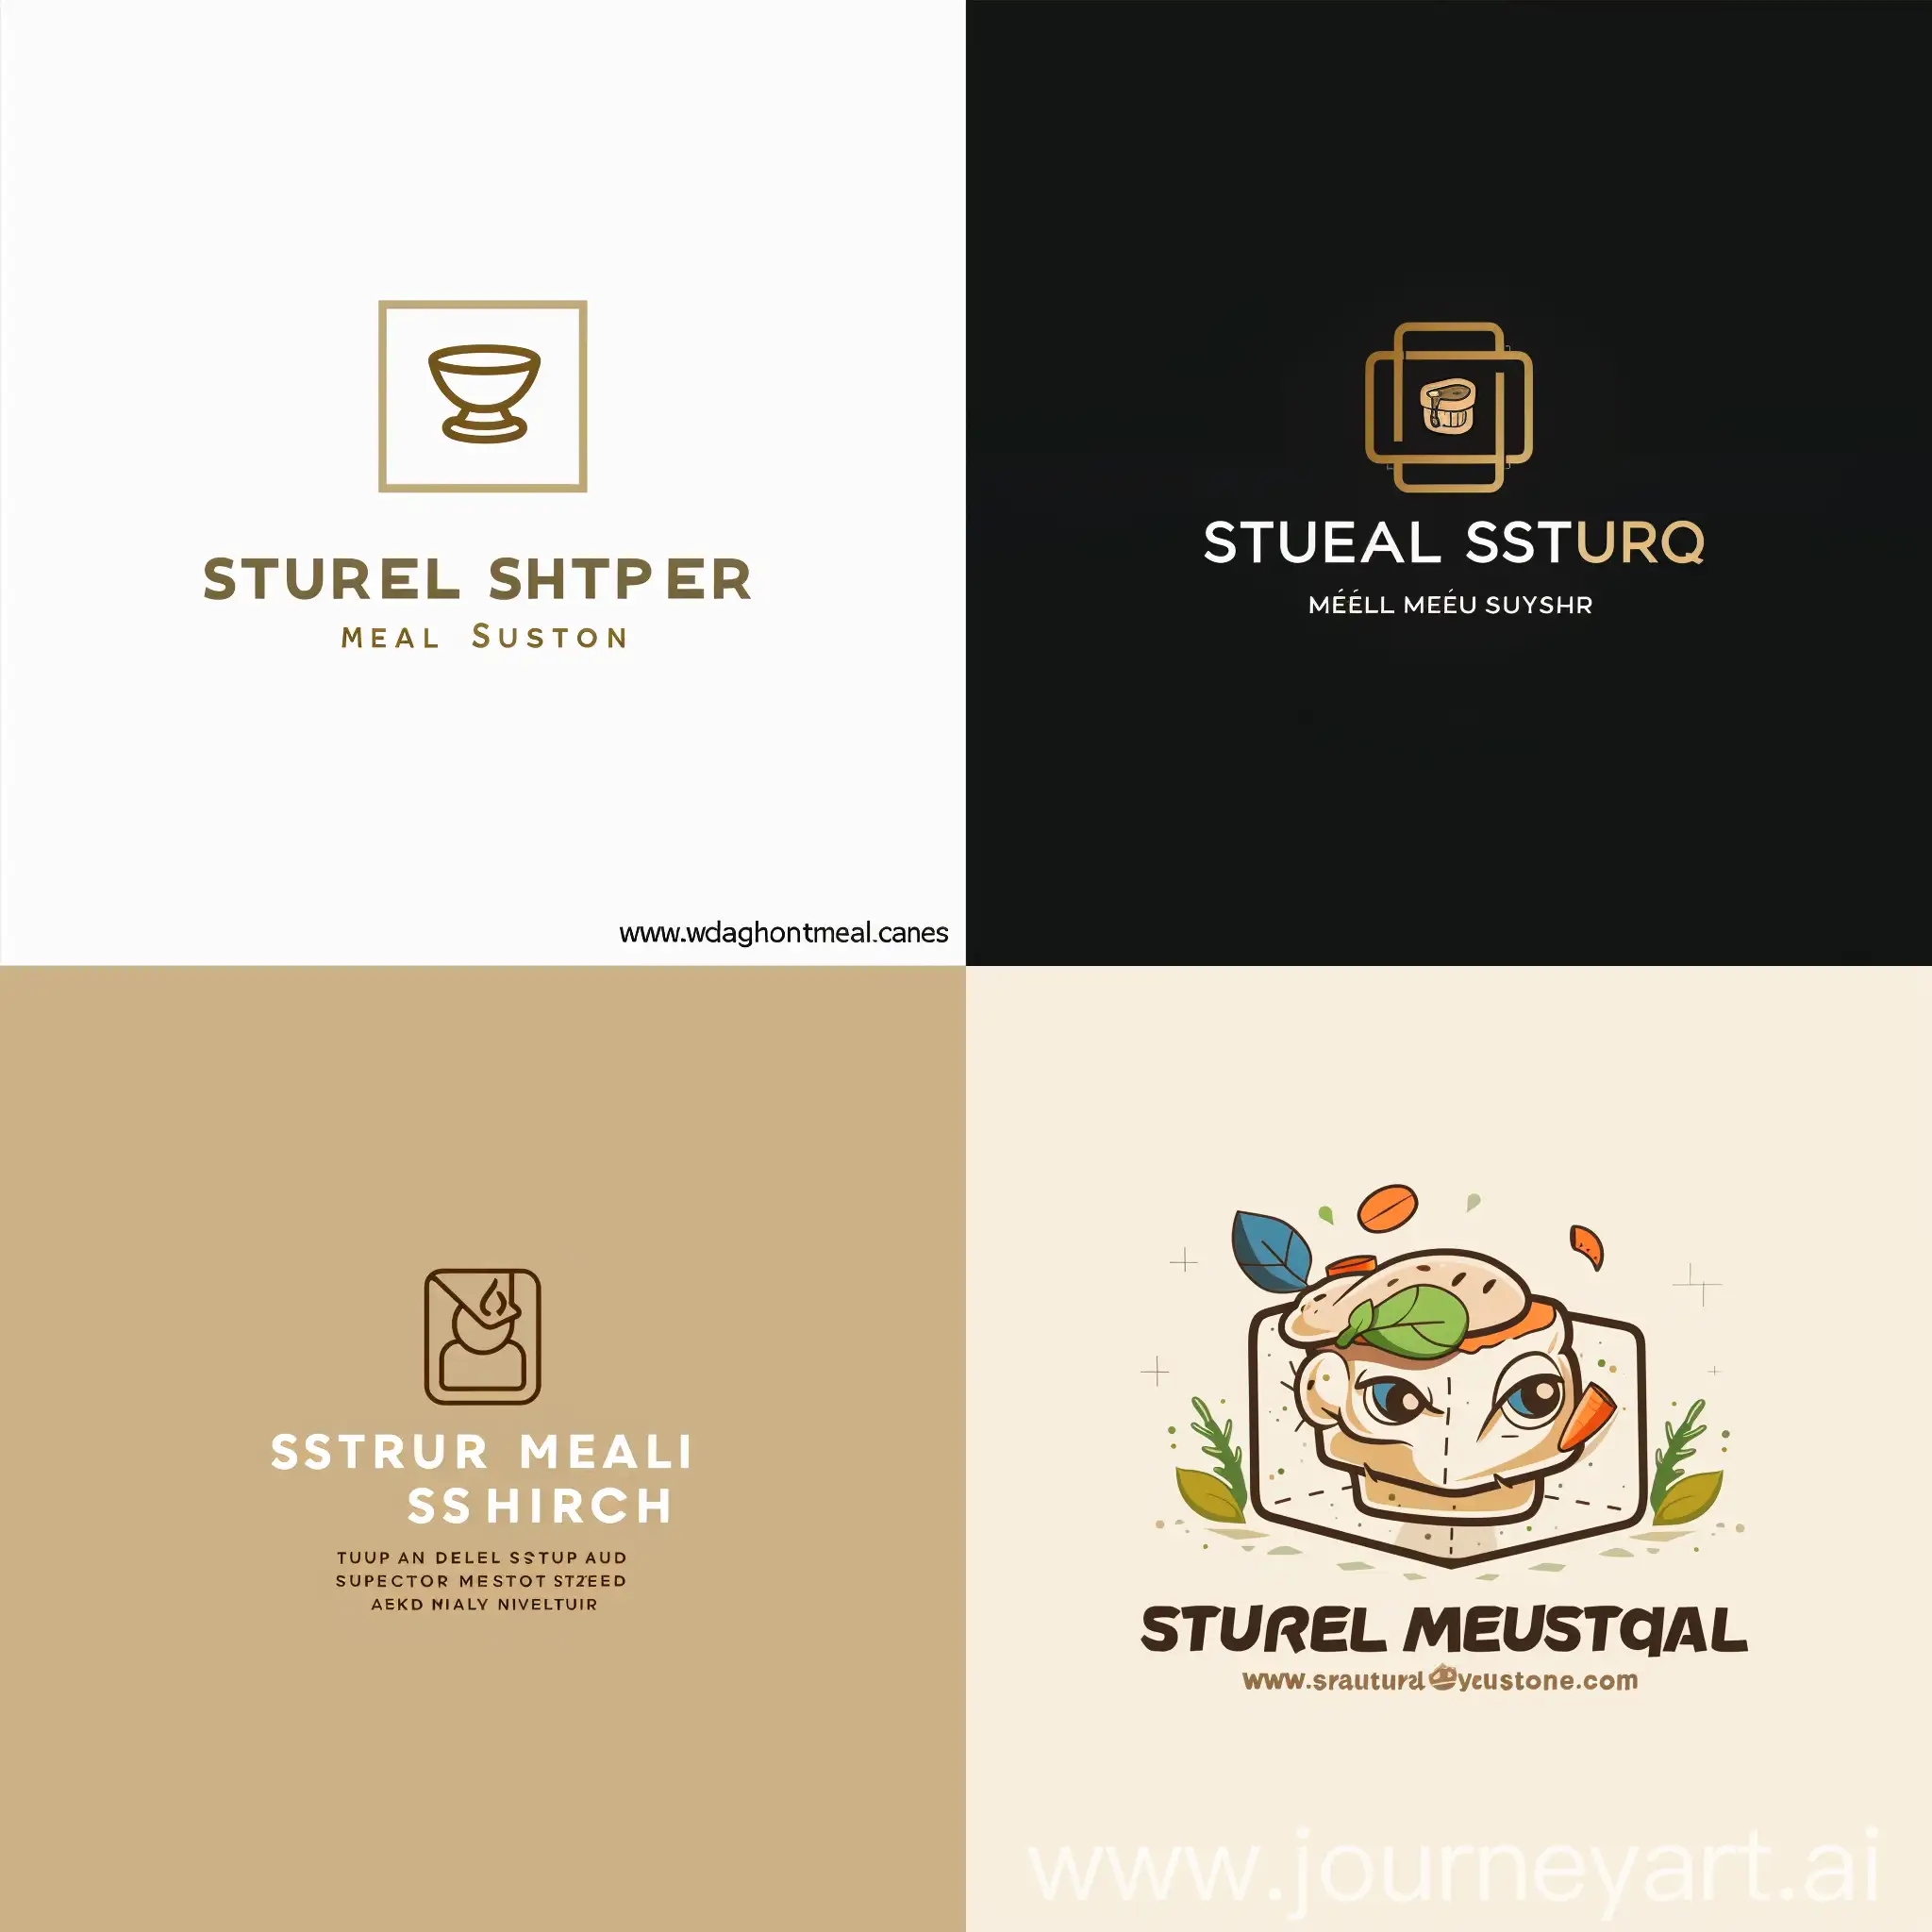 Create a innovative and quirky logo for food business named Square Meal Station